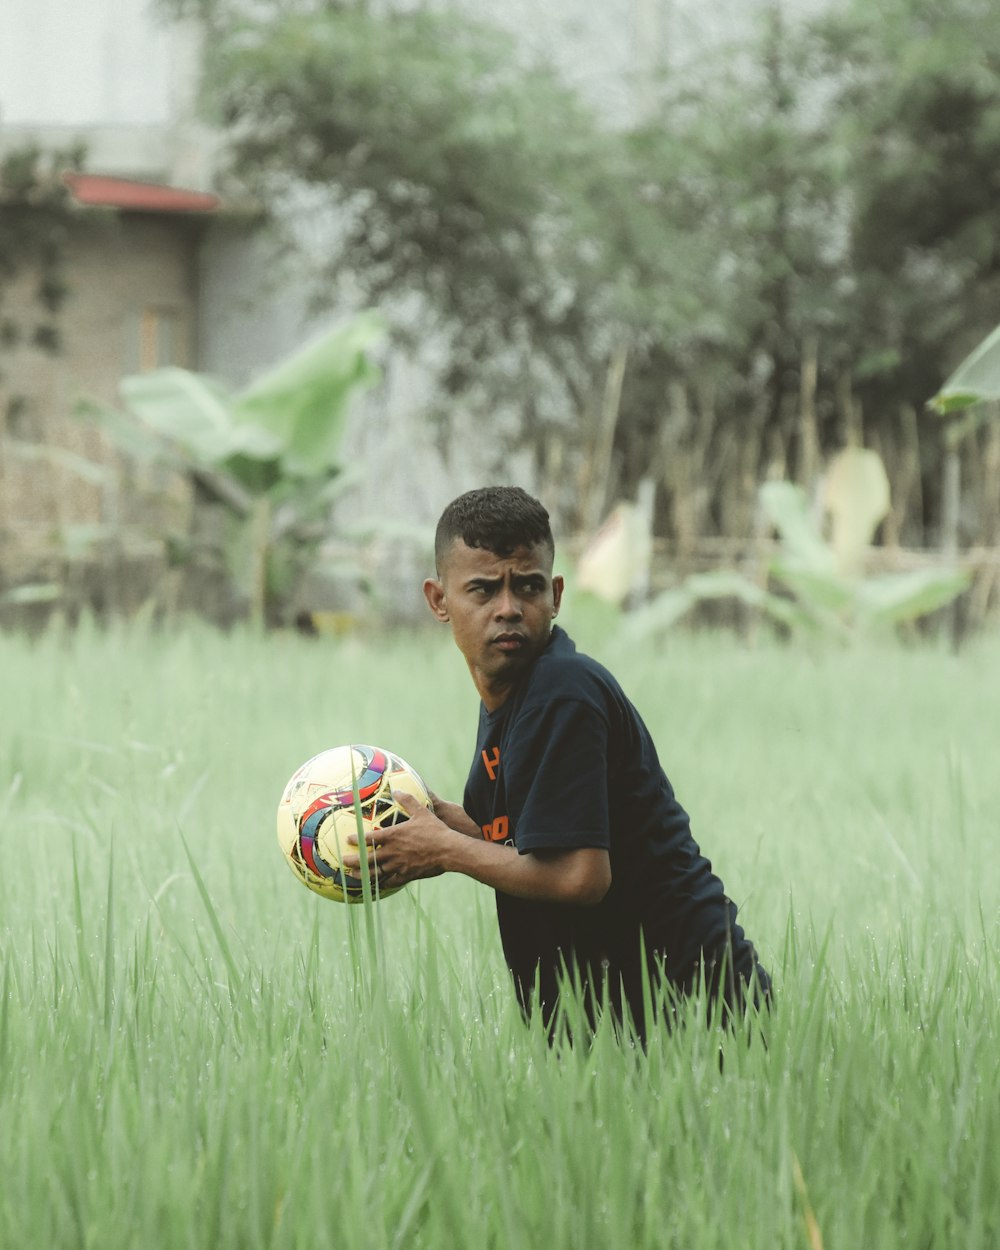 a man kneeling in a field holding a soccer ball